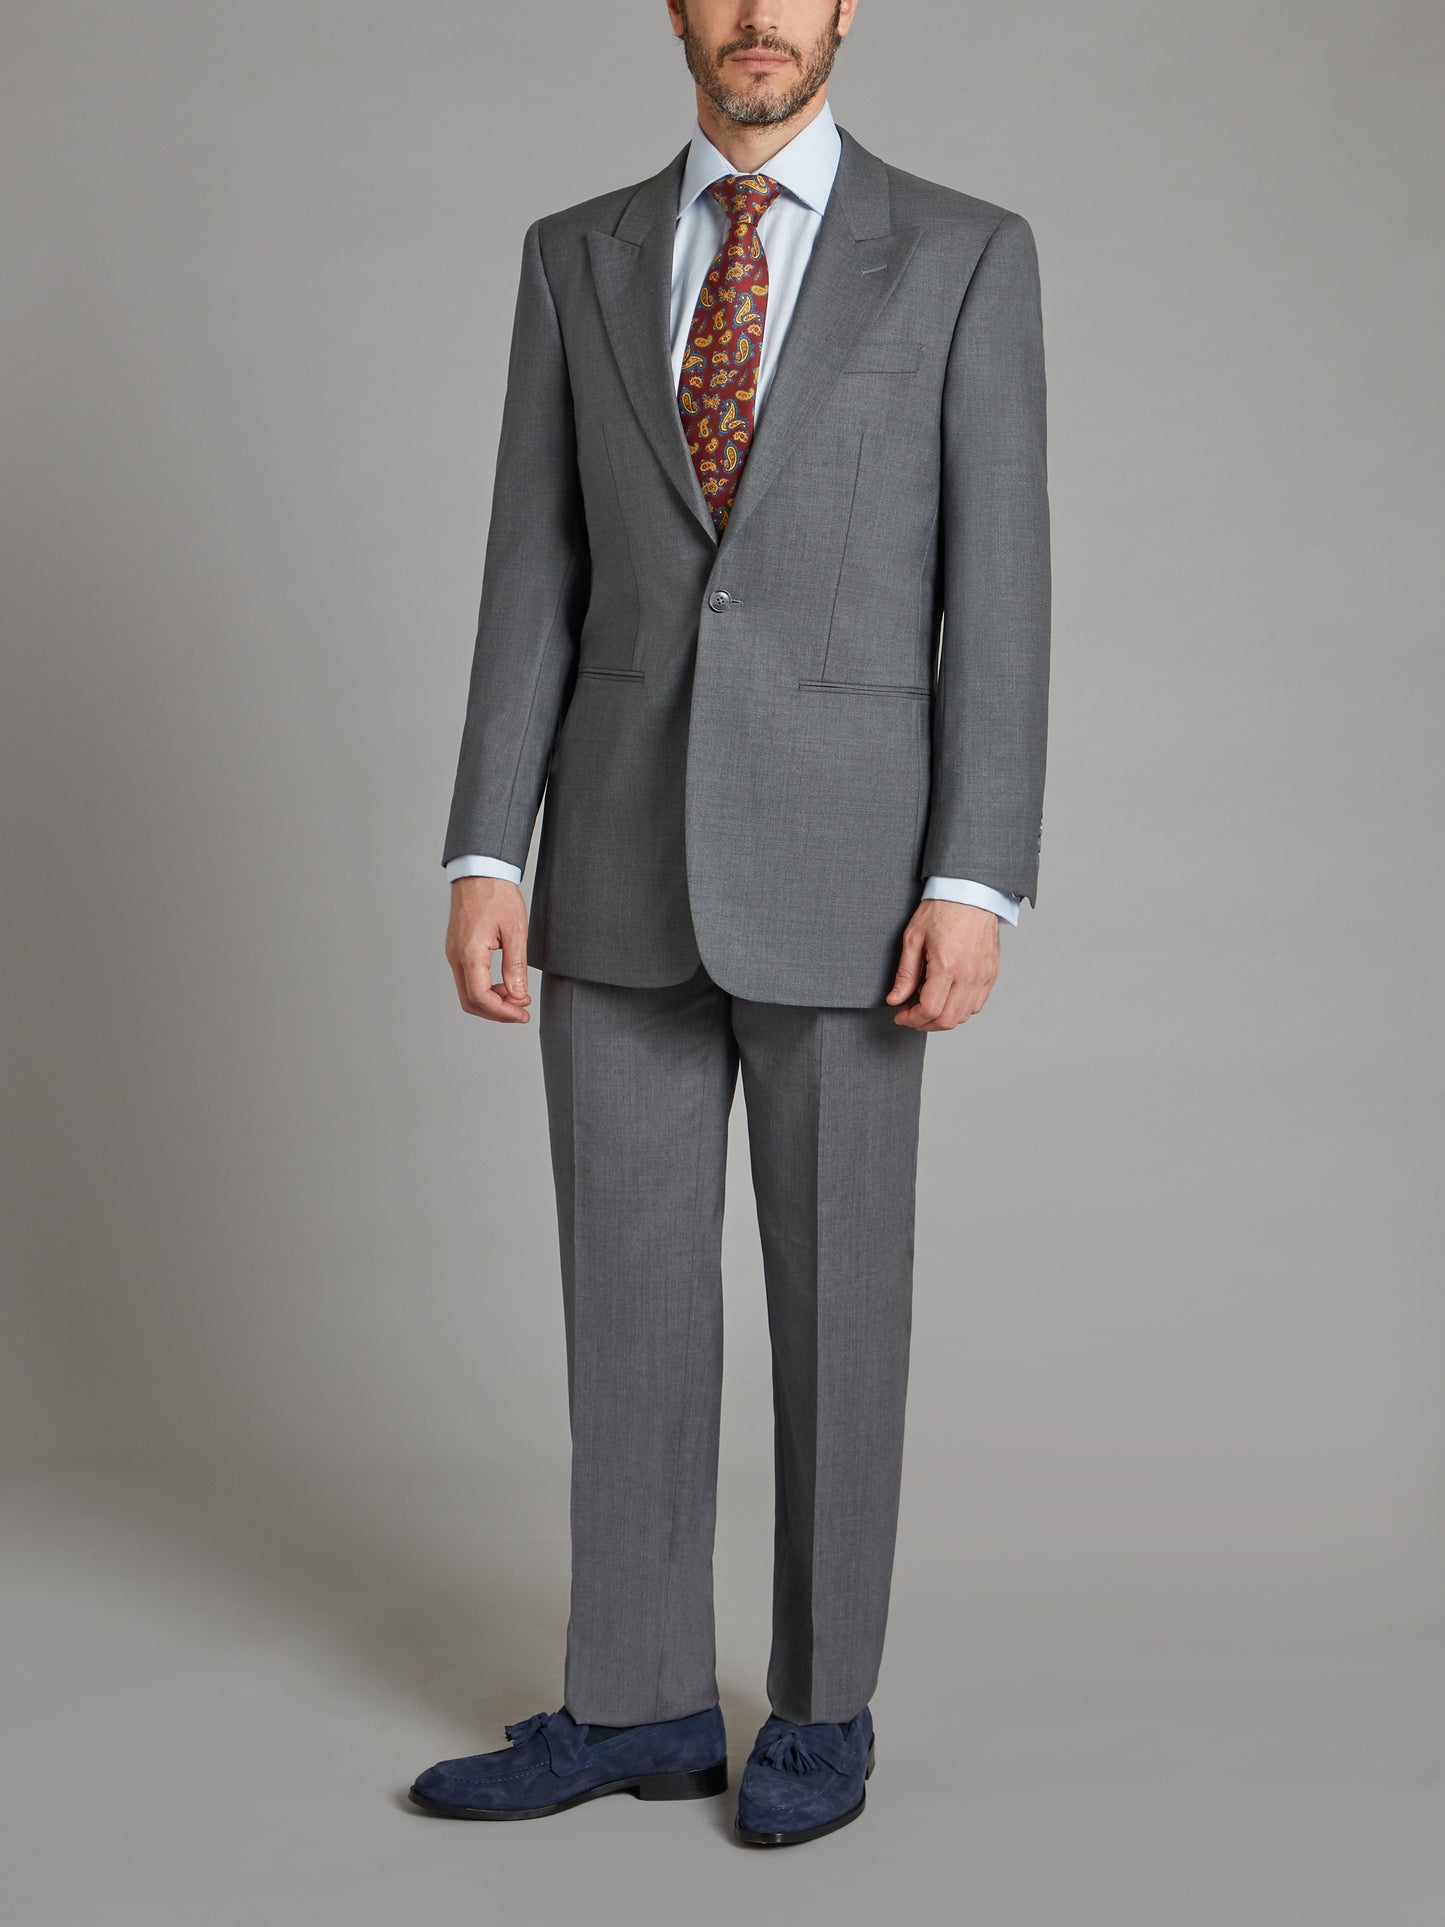 Limited Edition Carlyle Suit - Grey Lightweight